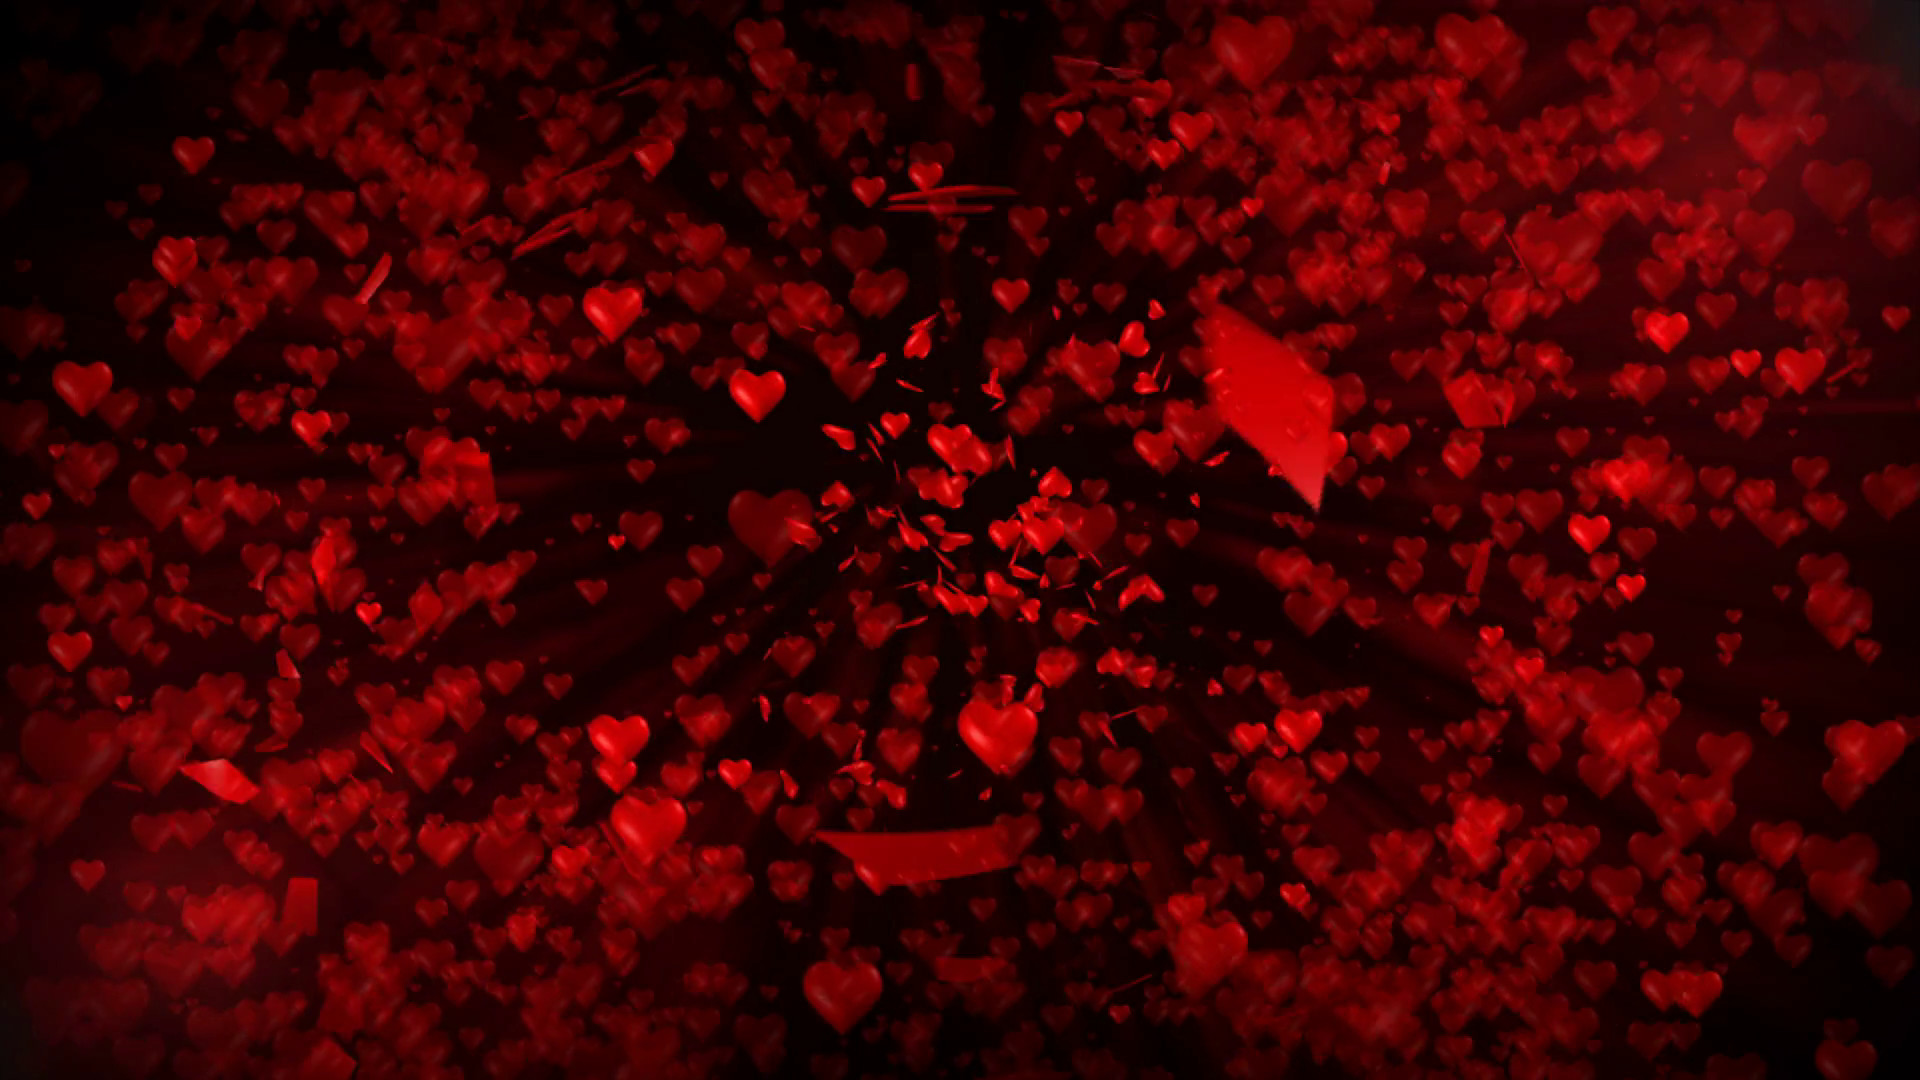 1920x1080 Subscription Library 3d animation of giant romantic red heart growing  larger and burst into little red hearts pattern